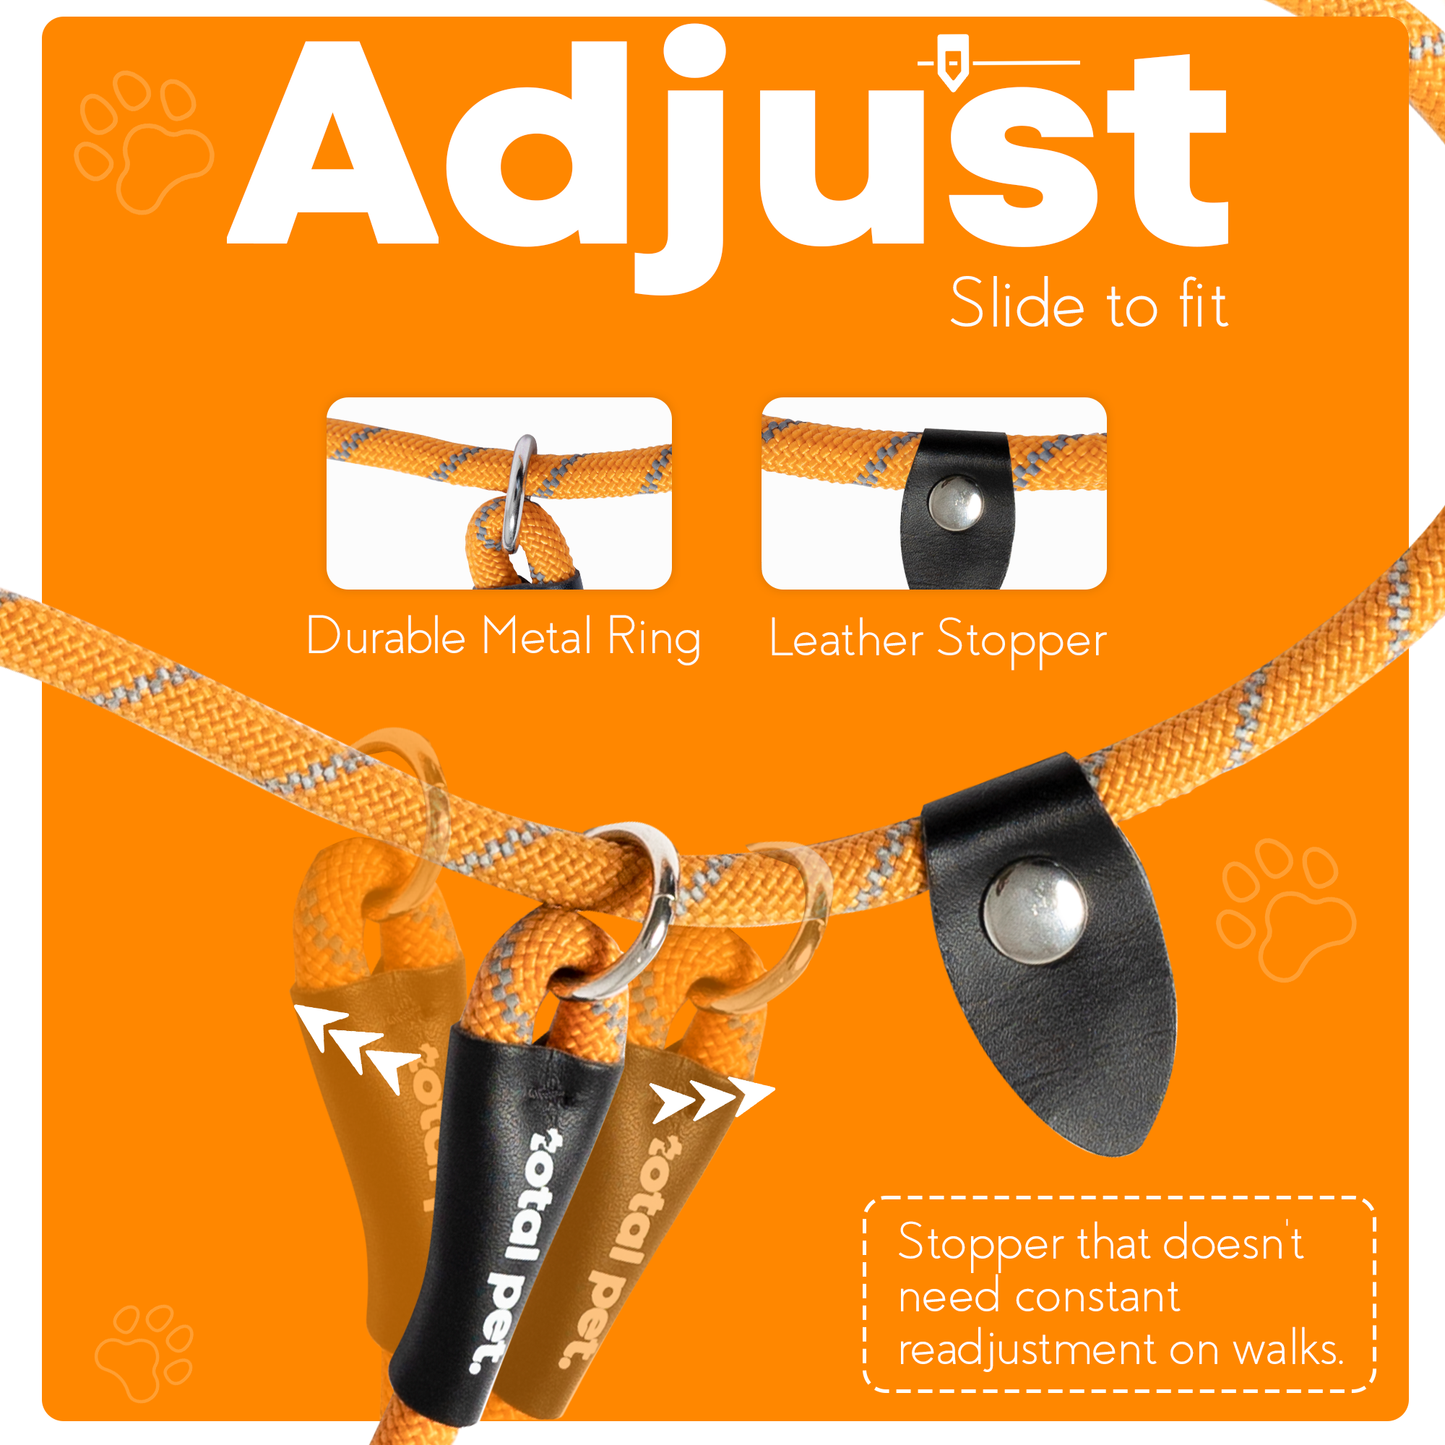 Rope Slip Lead for Dogs & Puppy Training - 1.8 Metres, Reflective W/Neck Padding - Total Pet